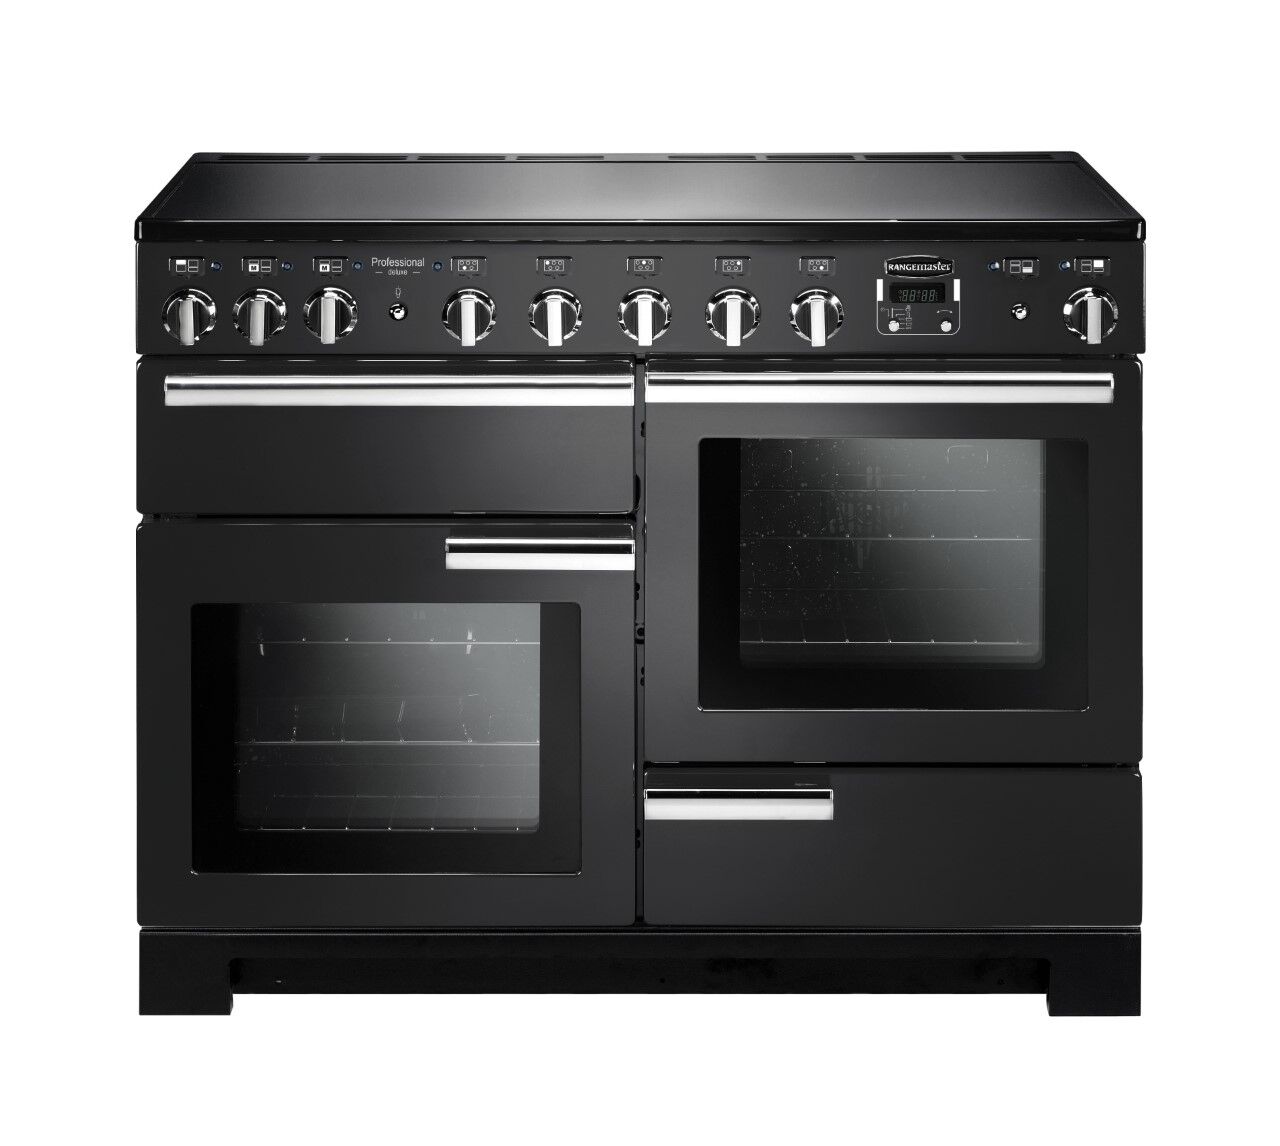 Rangemaster PDL110EICB/C Professional Deluxe 110cm Electric Induction Range Cooker Charcoal Black